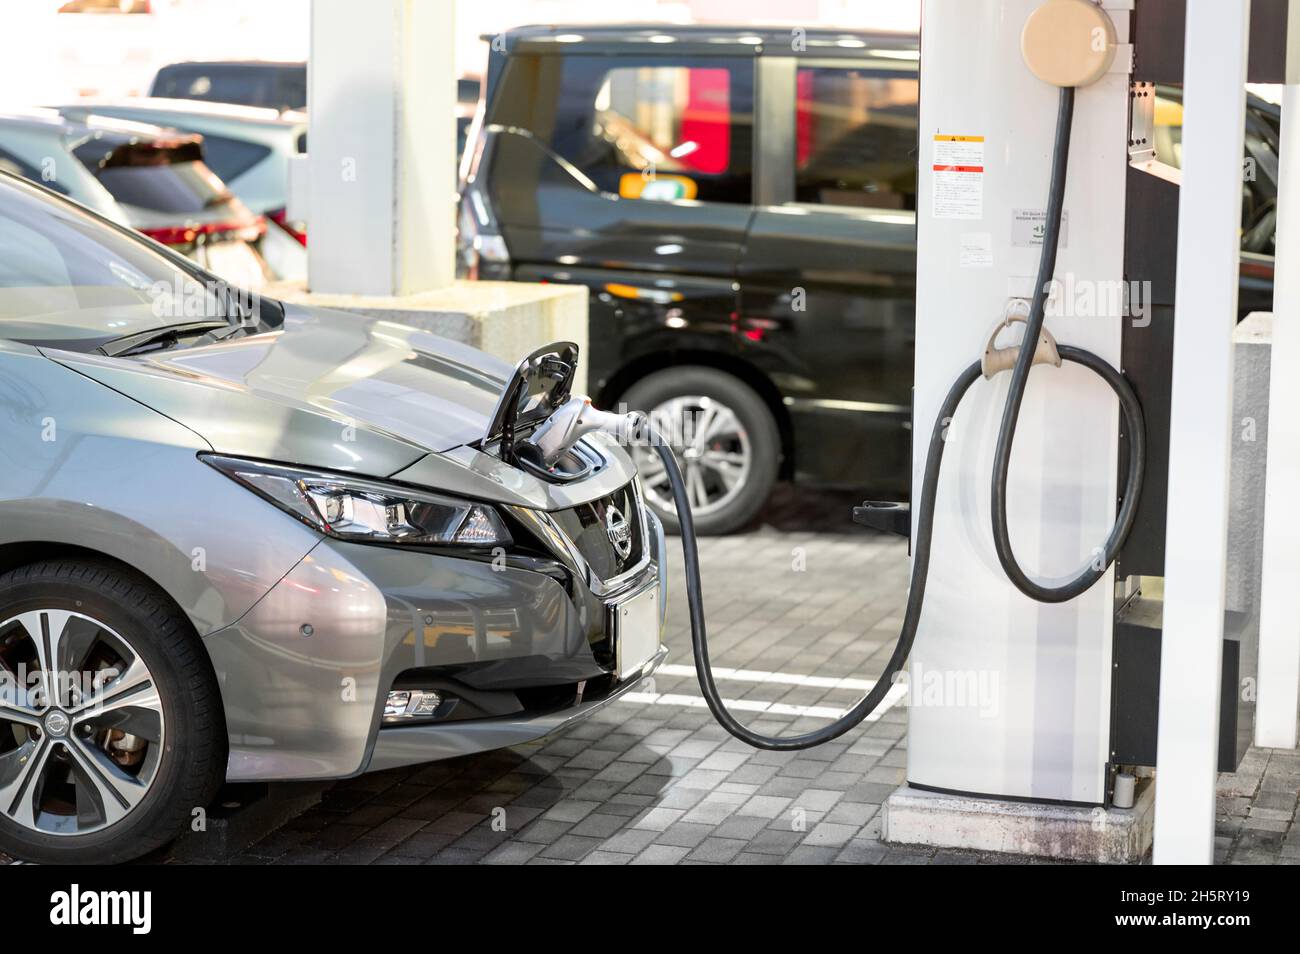 Nissan Leaf being charged at the EV Quick charging point for electric vehicles. Electric car being charged by a cable. Stock Photo